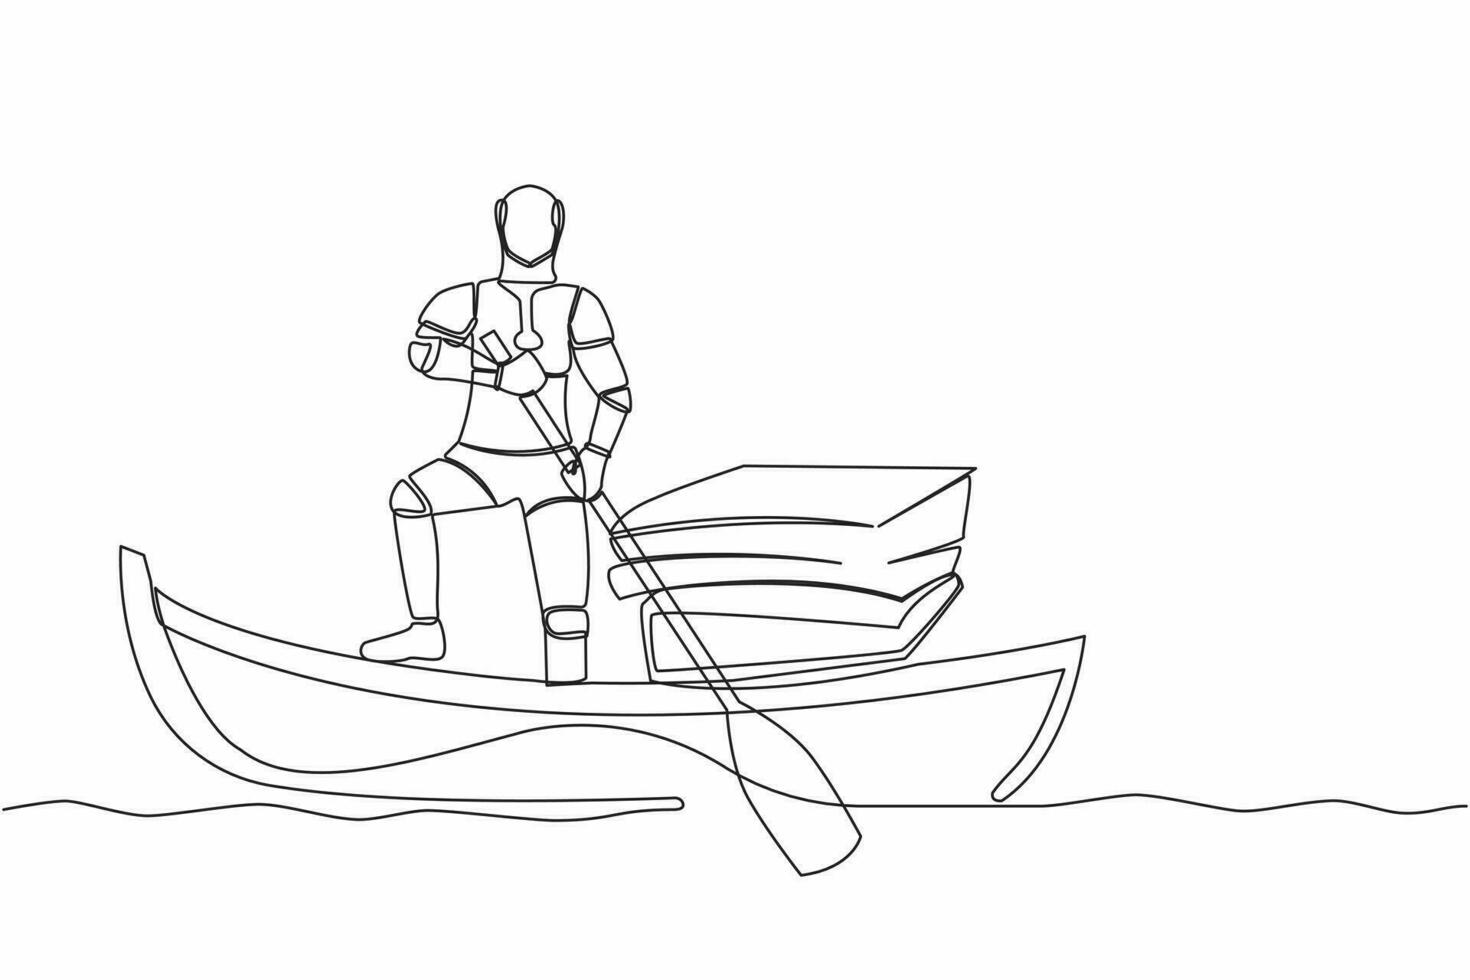 Single continuous line drawing robot sailing away on boat with stack of papers. Manage digital document in tech company. Future technology development. One line draw graphic design vector illustration